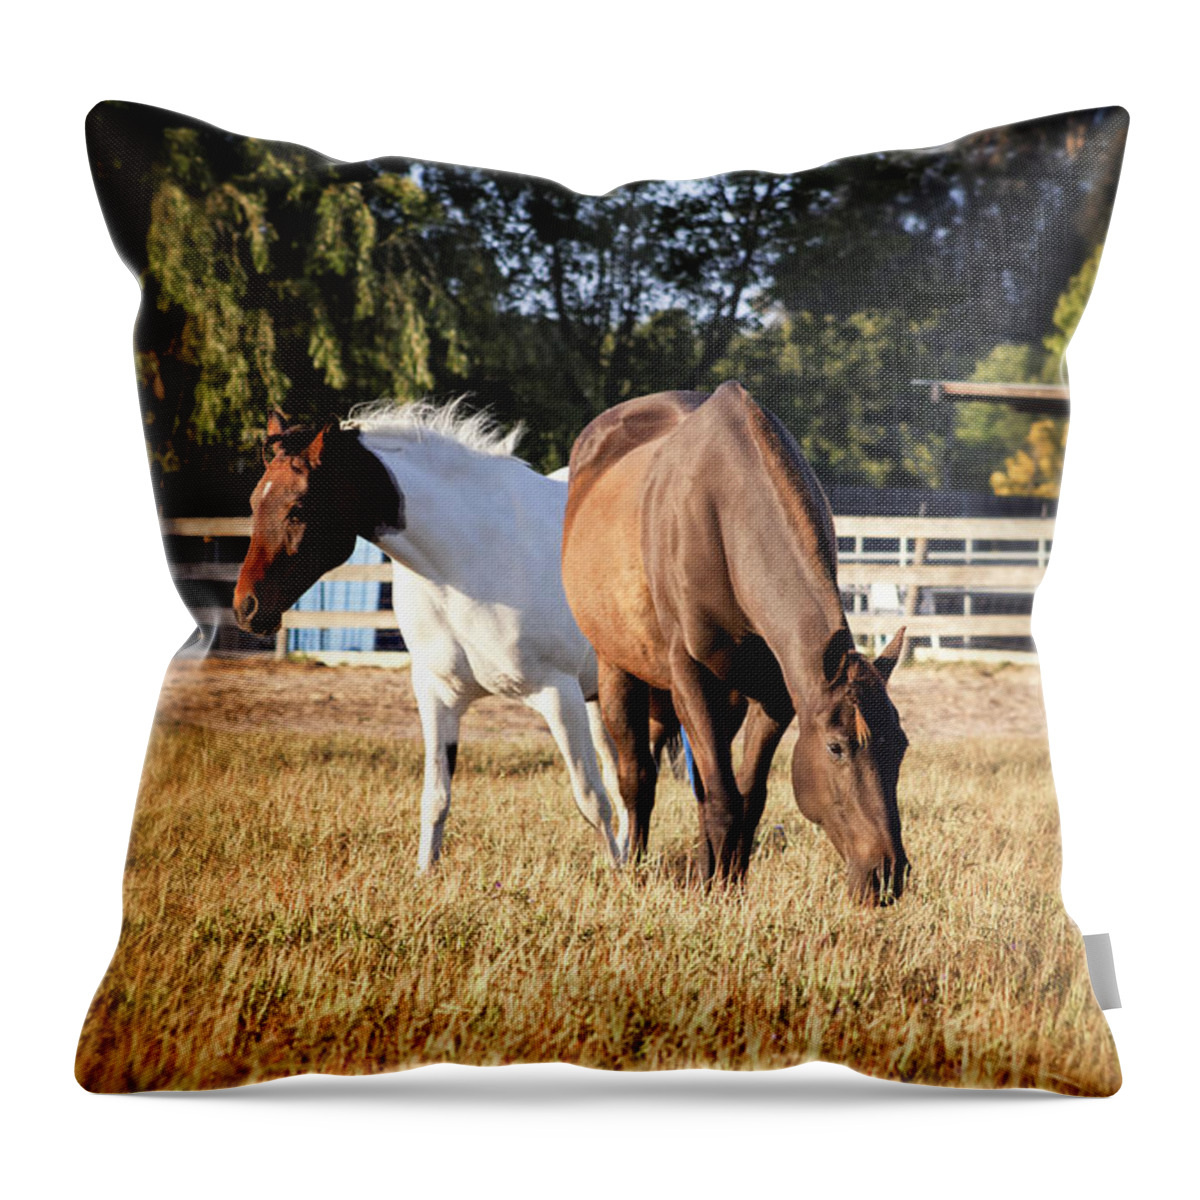 Horses Throw Pillow featuring the photograph Two Horses by Caitlyn Grasso